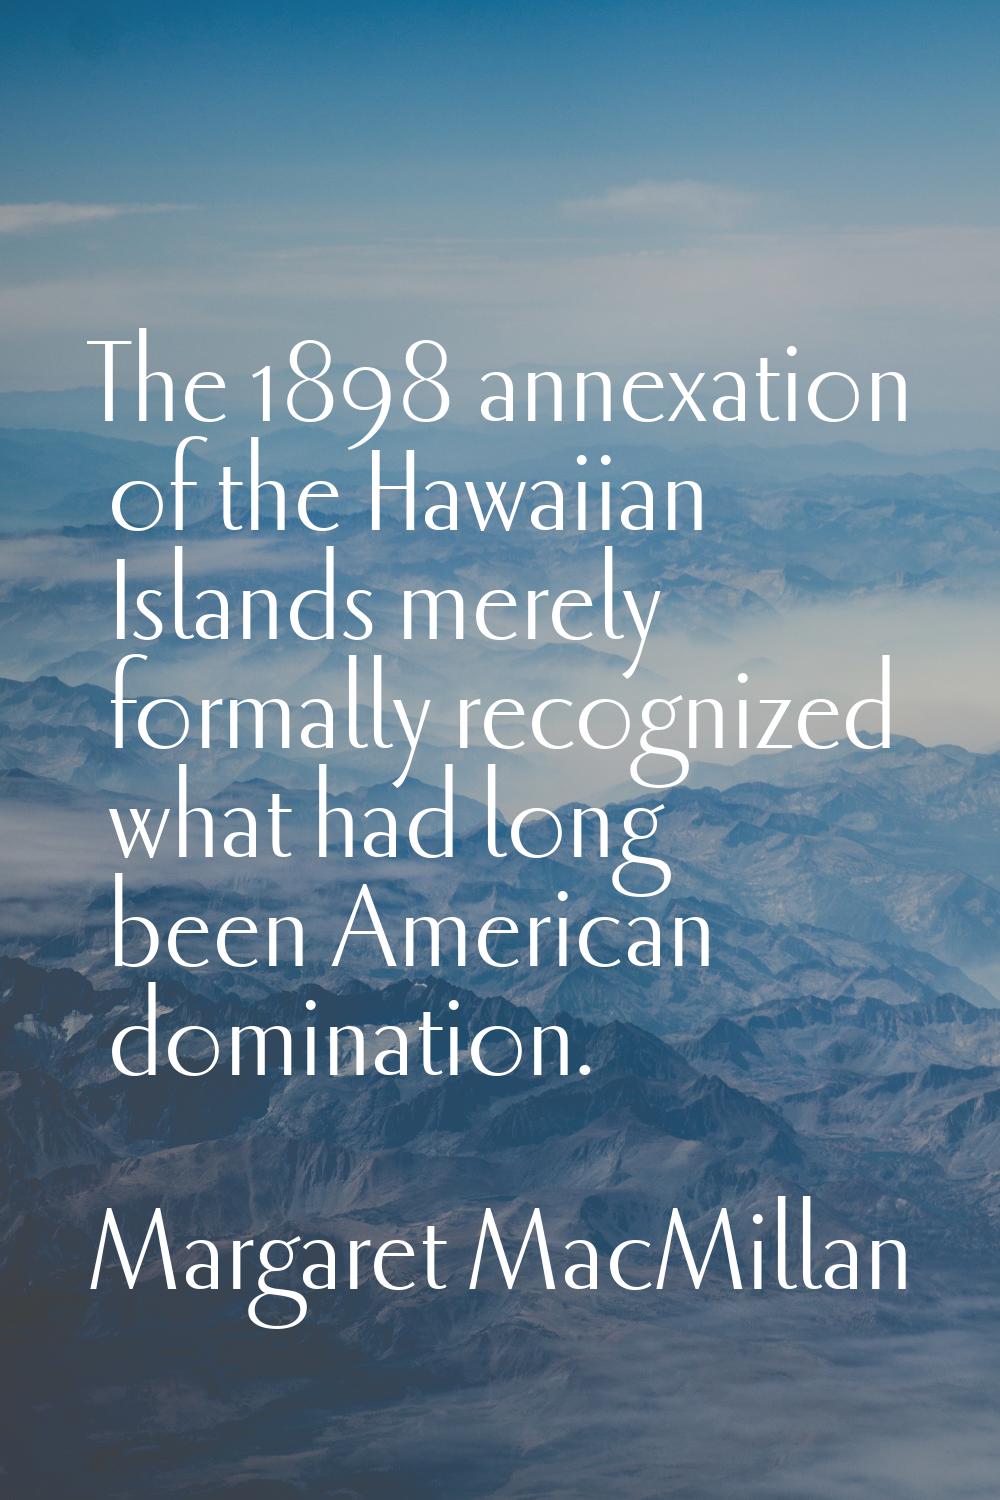 The 1898 annexation of the Hawaiian Islands merely formally recognized what had long been American 